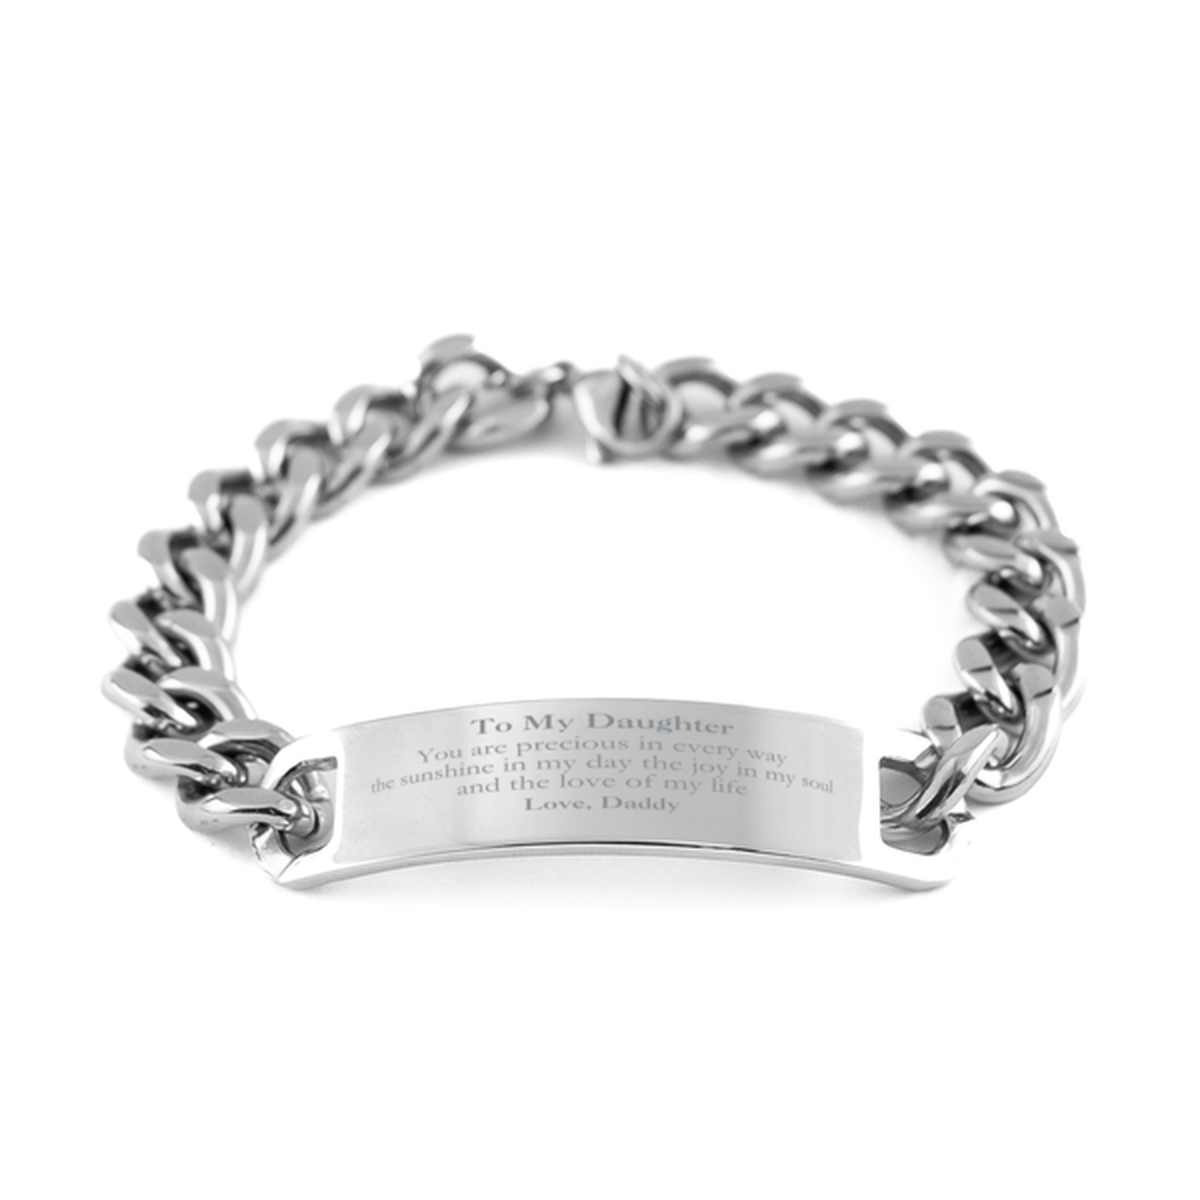 Graduation Gifts for Daughter Cuban Chain Stainless Steel Bracelet Present from Daddy, Christmas Daughter Birthday Gifts Daughter You are precious in every way the sunshine in my day. Love, Daddy